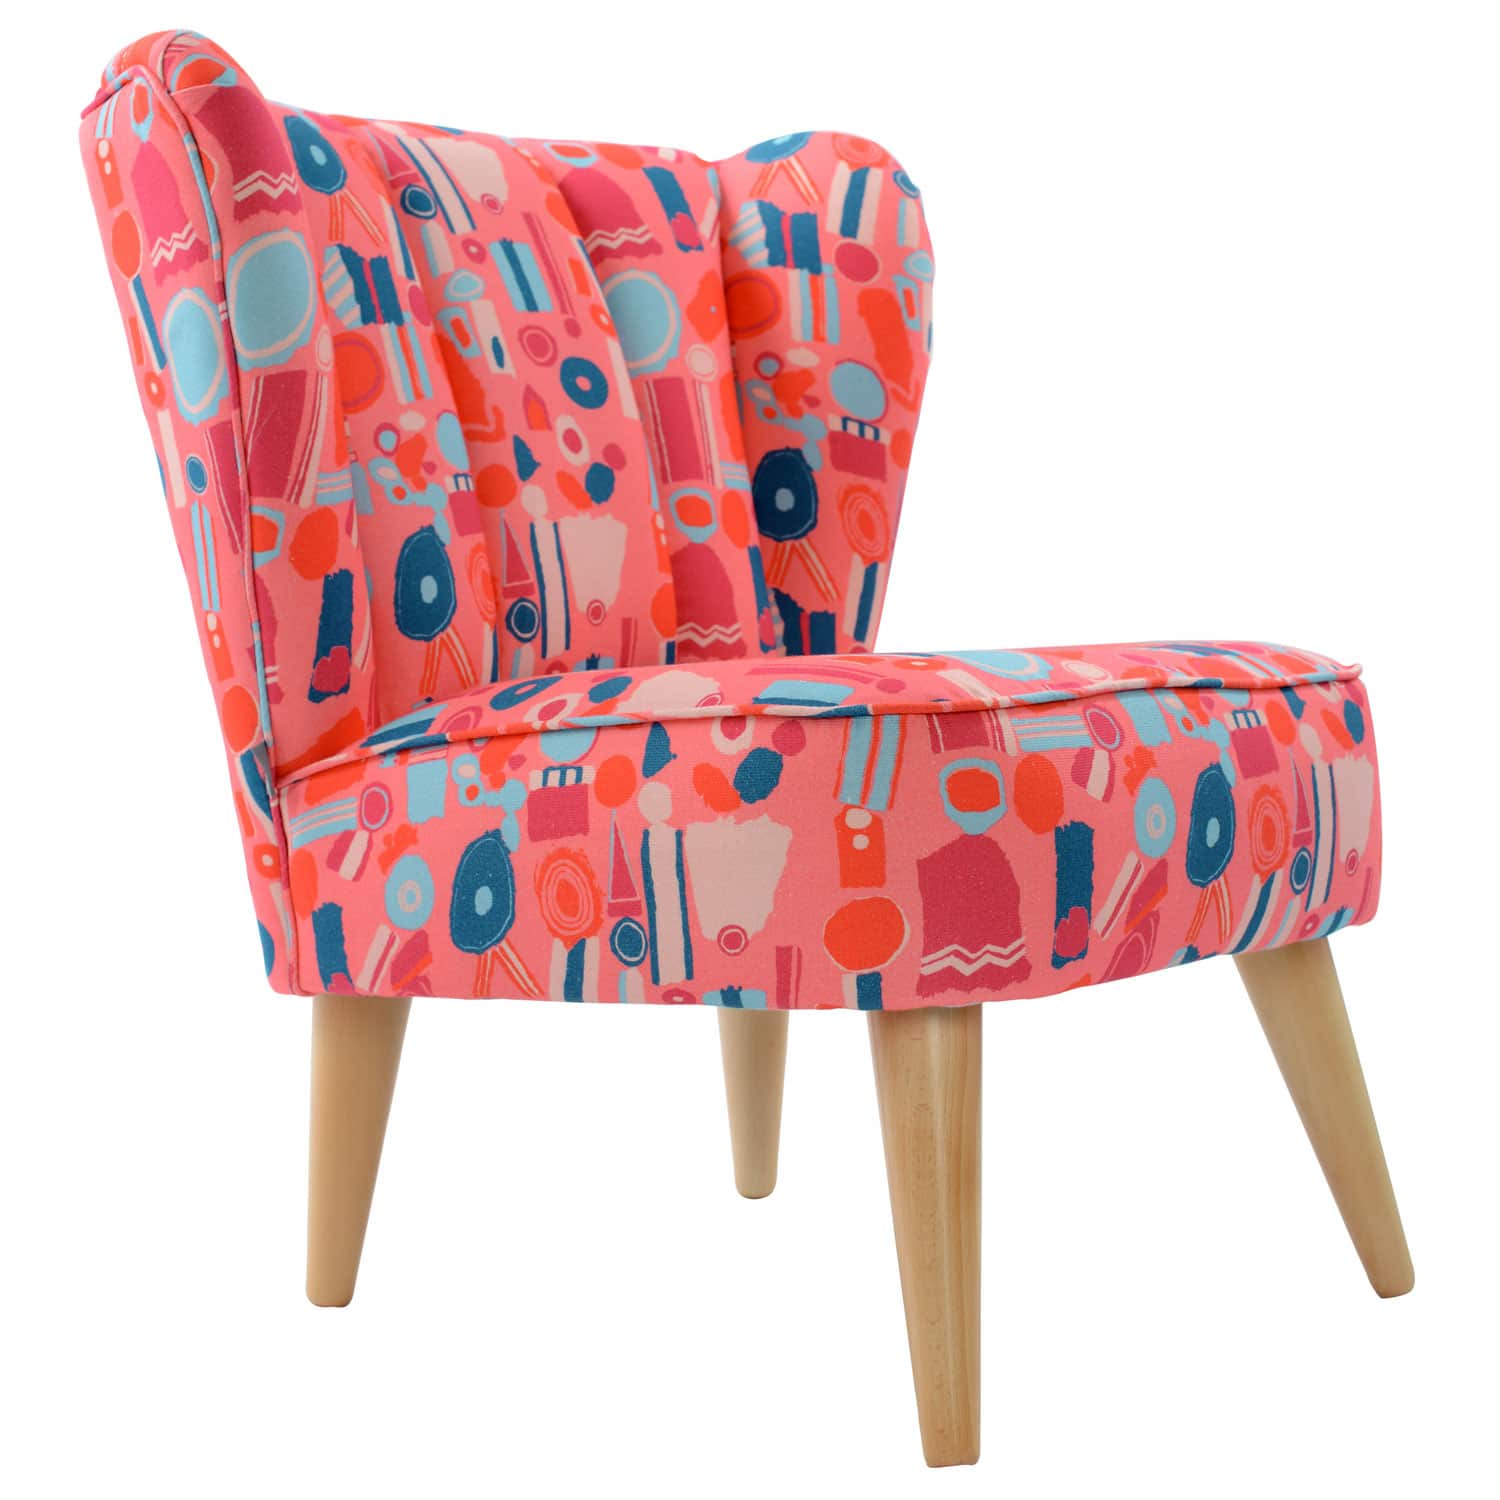 Heal's 1810 Antoinette Cocktail Chair in Top Brass 2 by Zandra Rhodes May Design Series